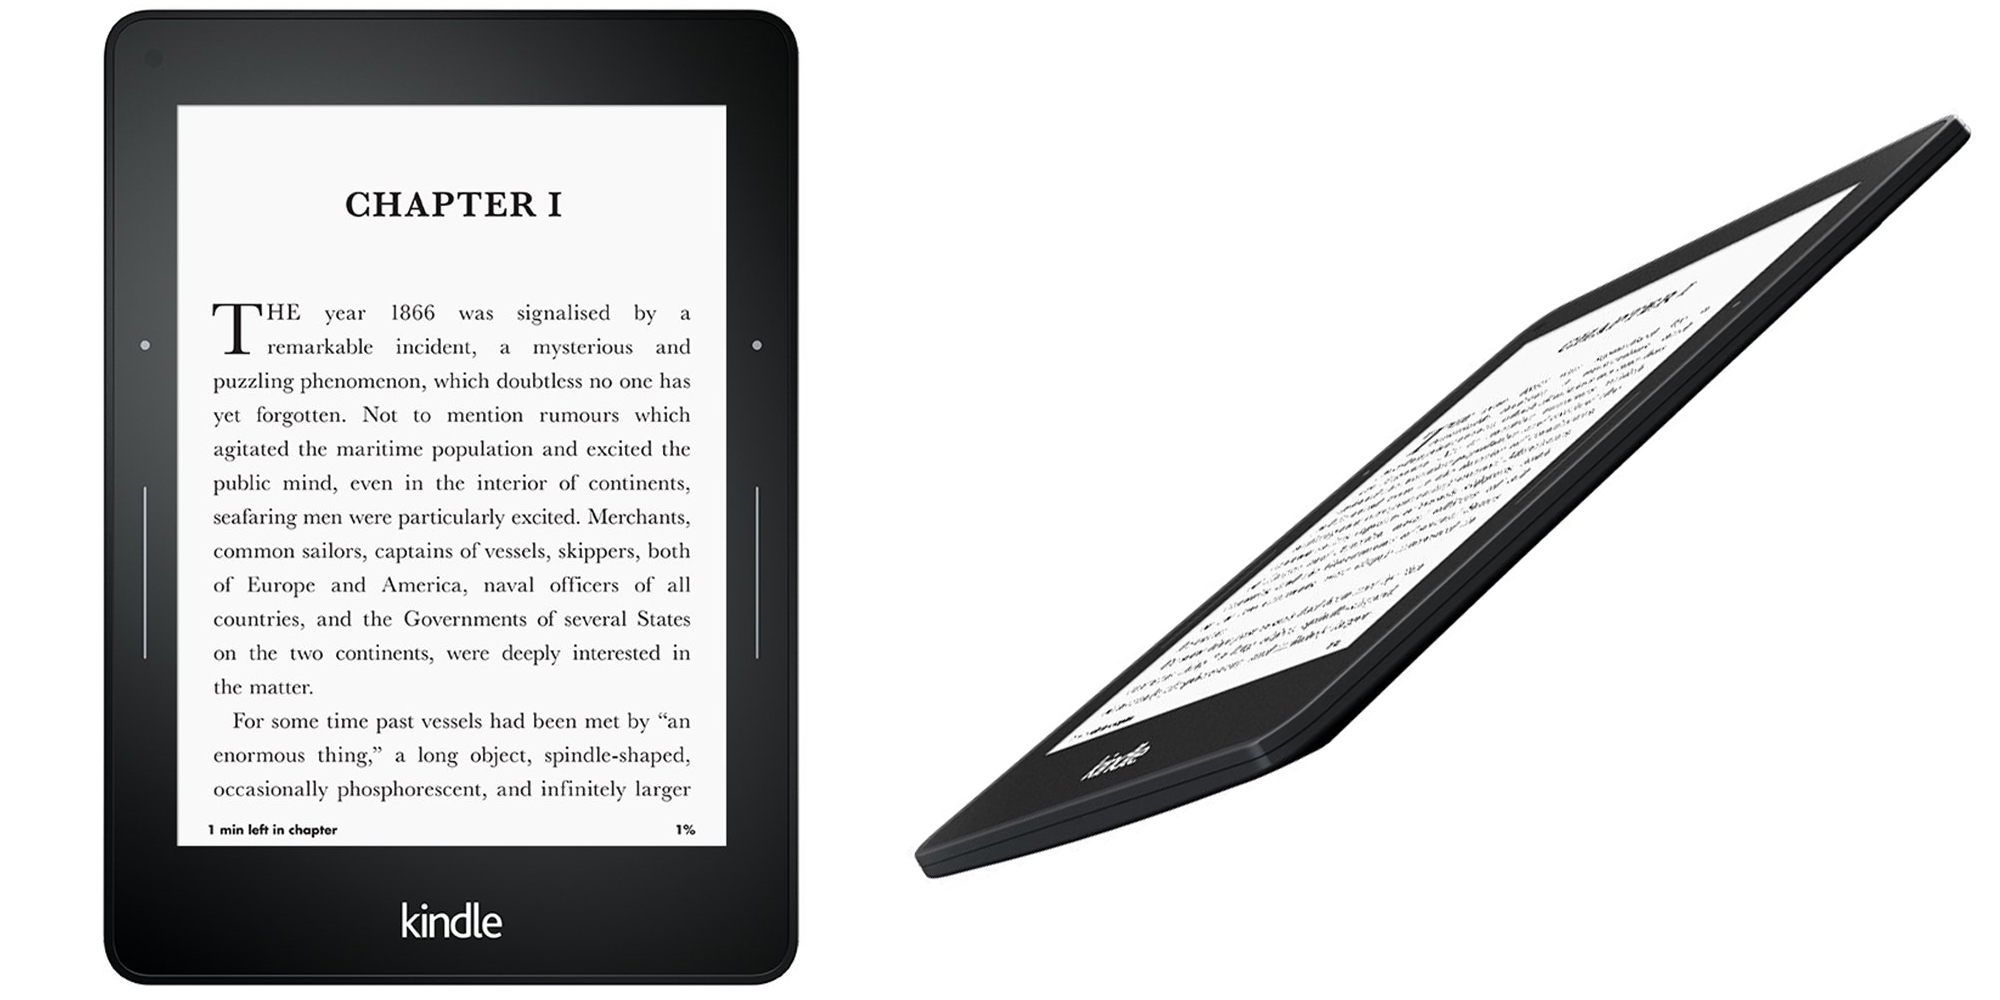 amazon kindle reader for mac